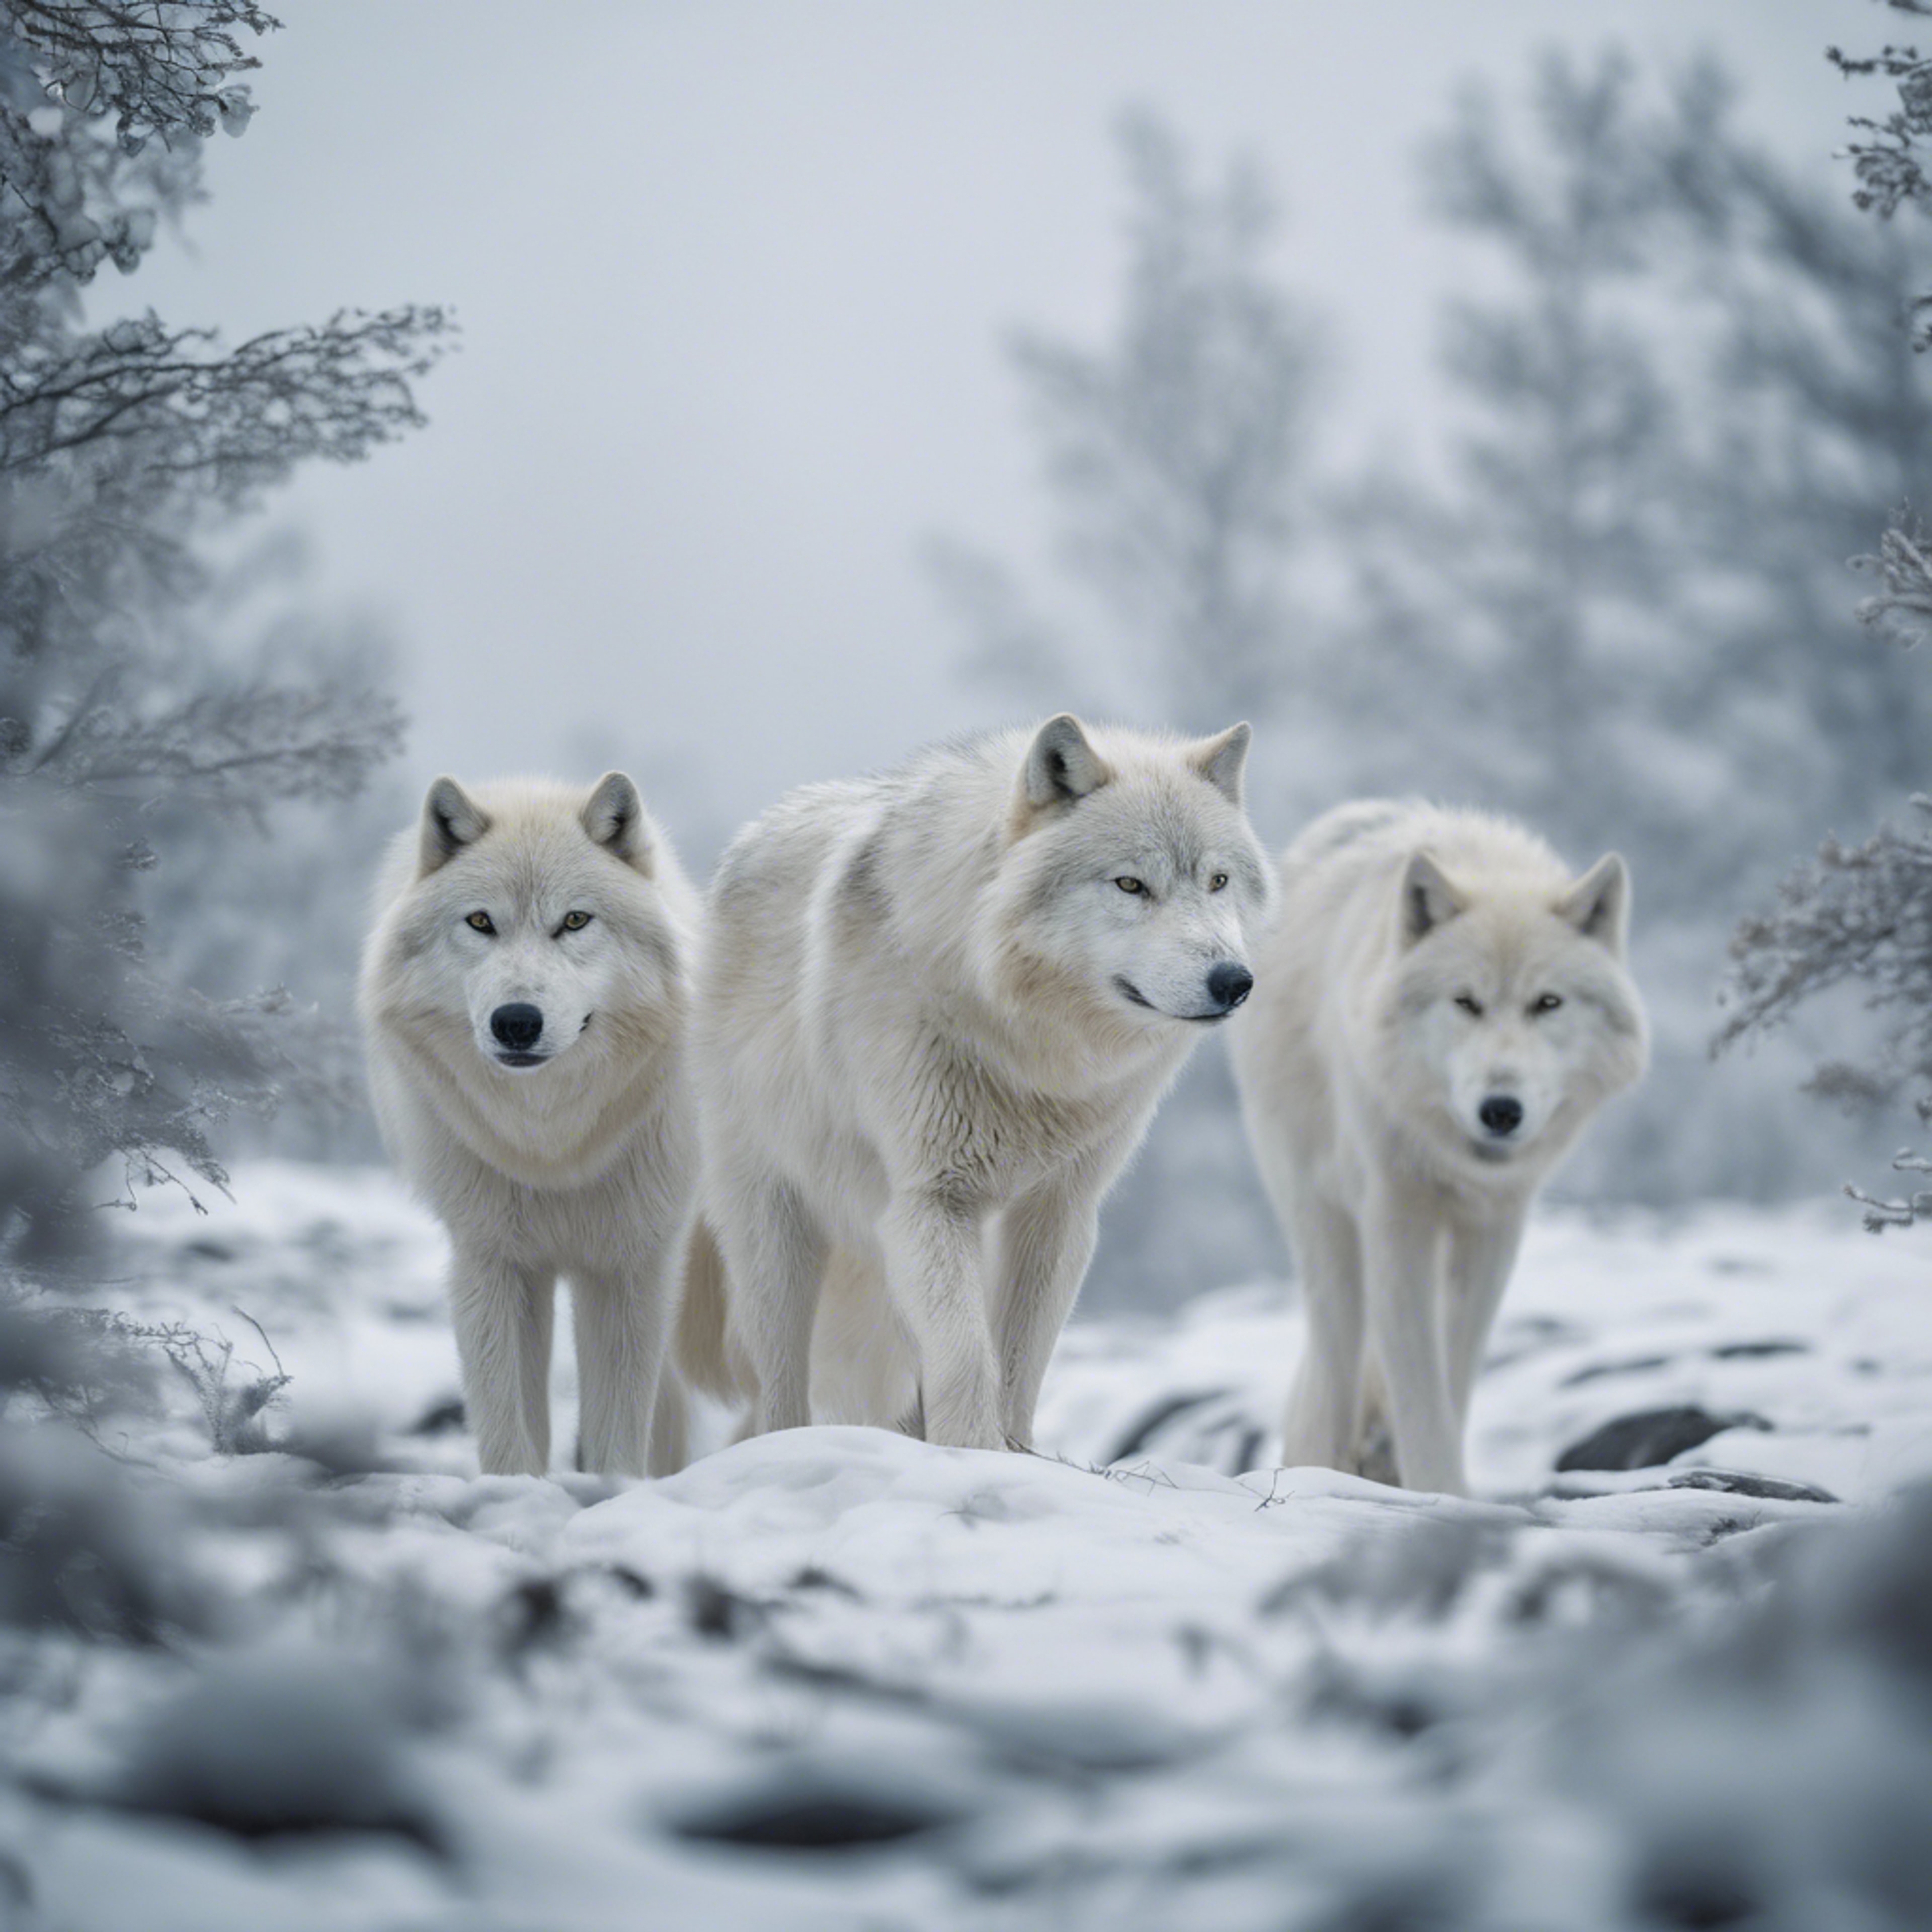 An Arctic landscape, a group of silver white wolves prowling in the misty white snow. Tapeta[d8abdf0eee2a43a8a025]